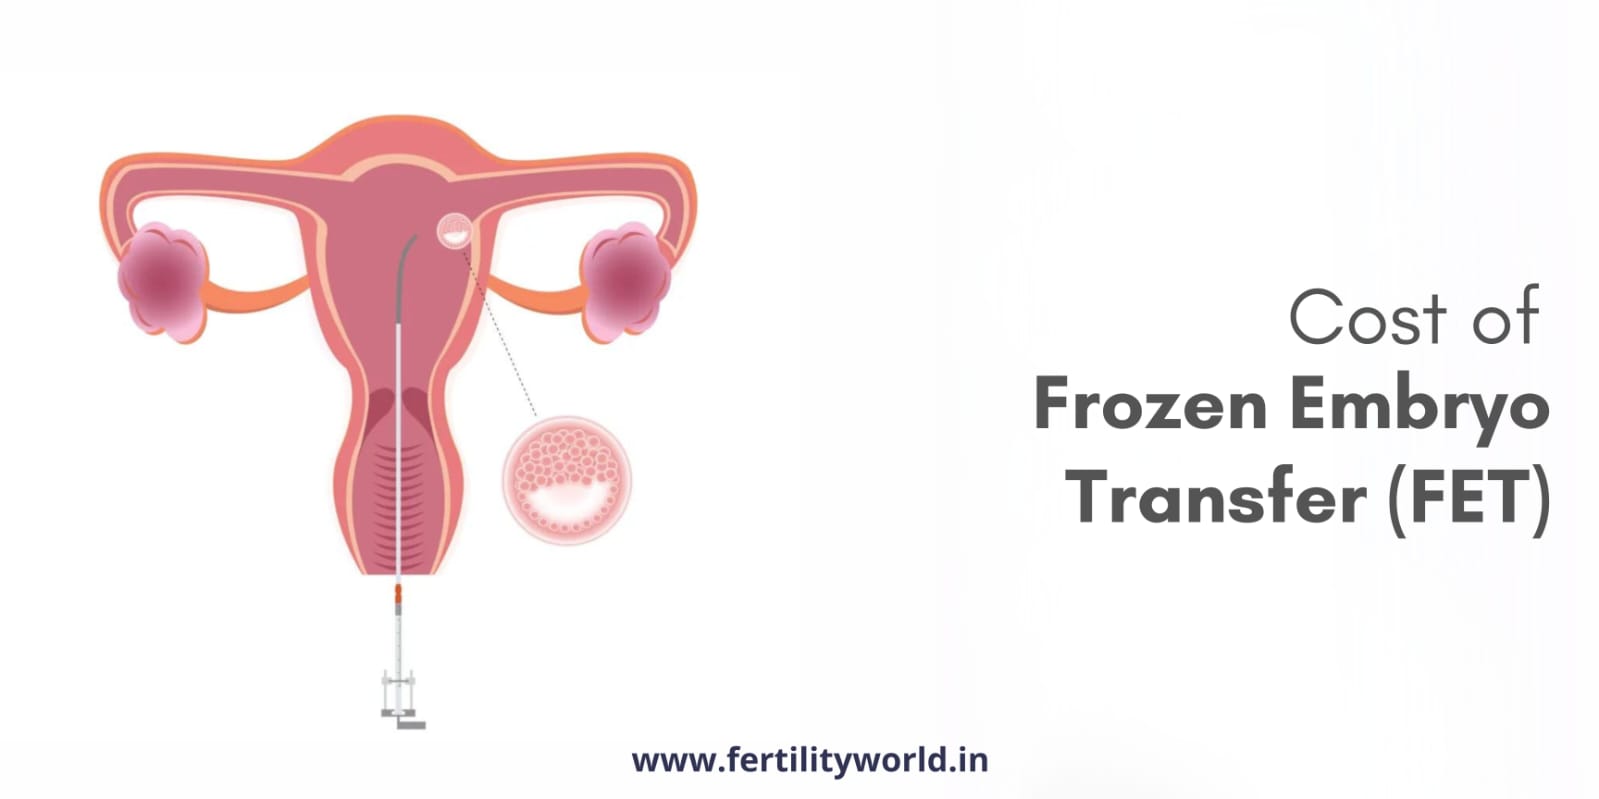 Cost of Frozen Embryo Transfer (FET) in Bangalore